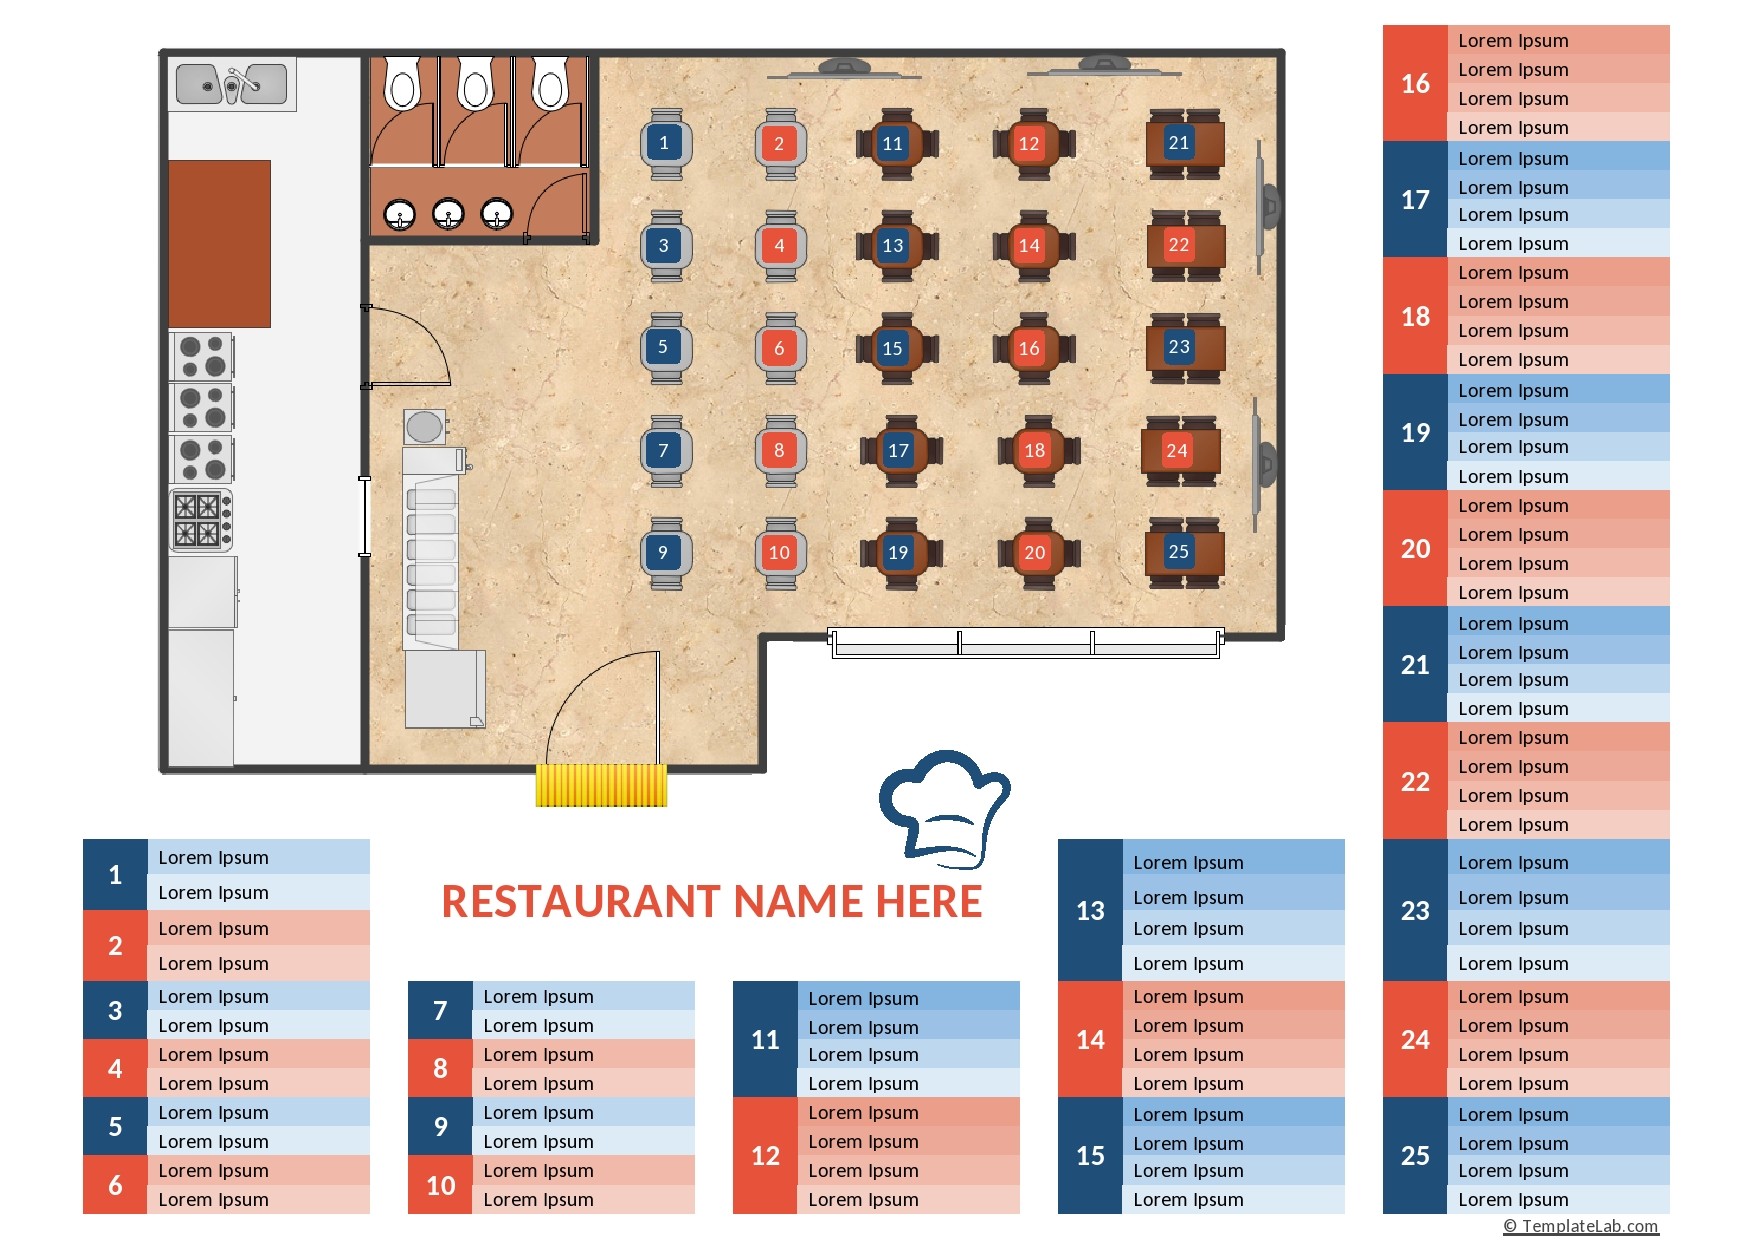 Free Restaurant Seating Chart Template